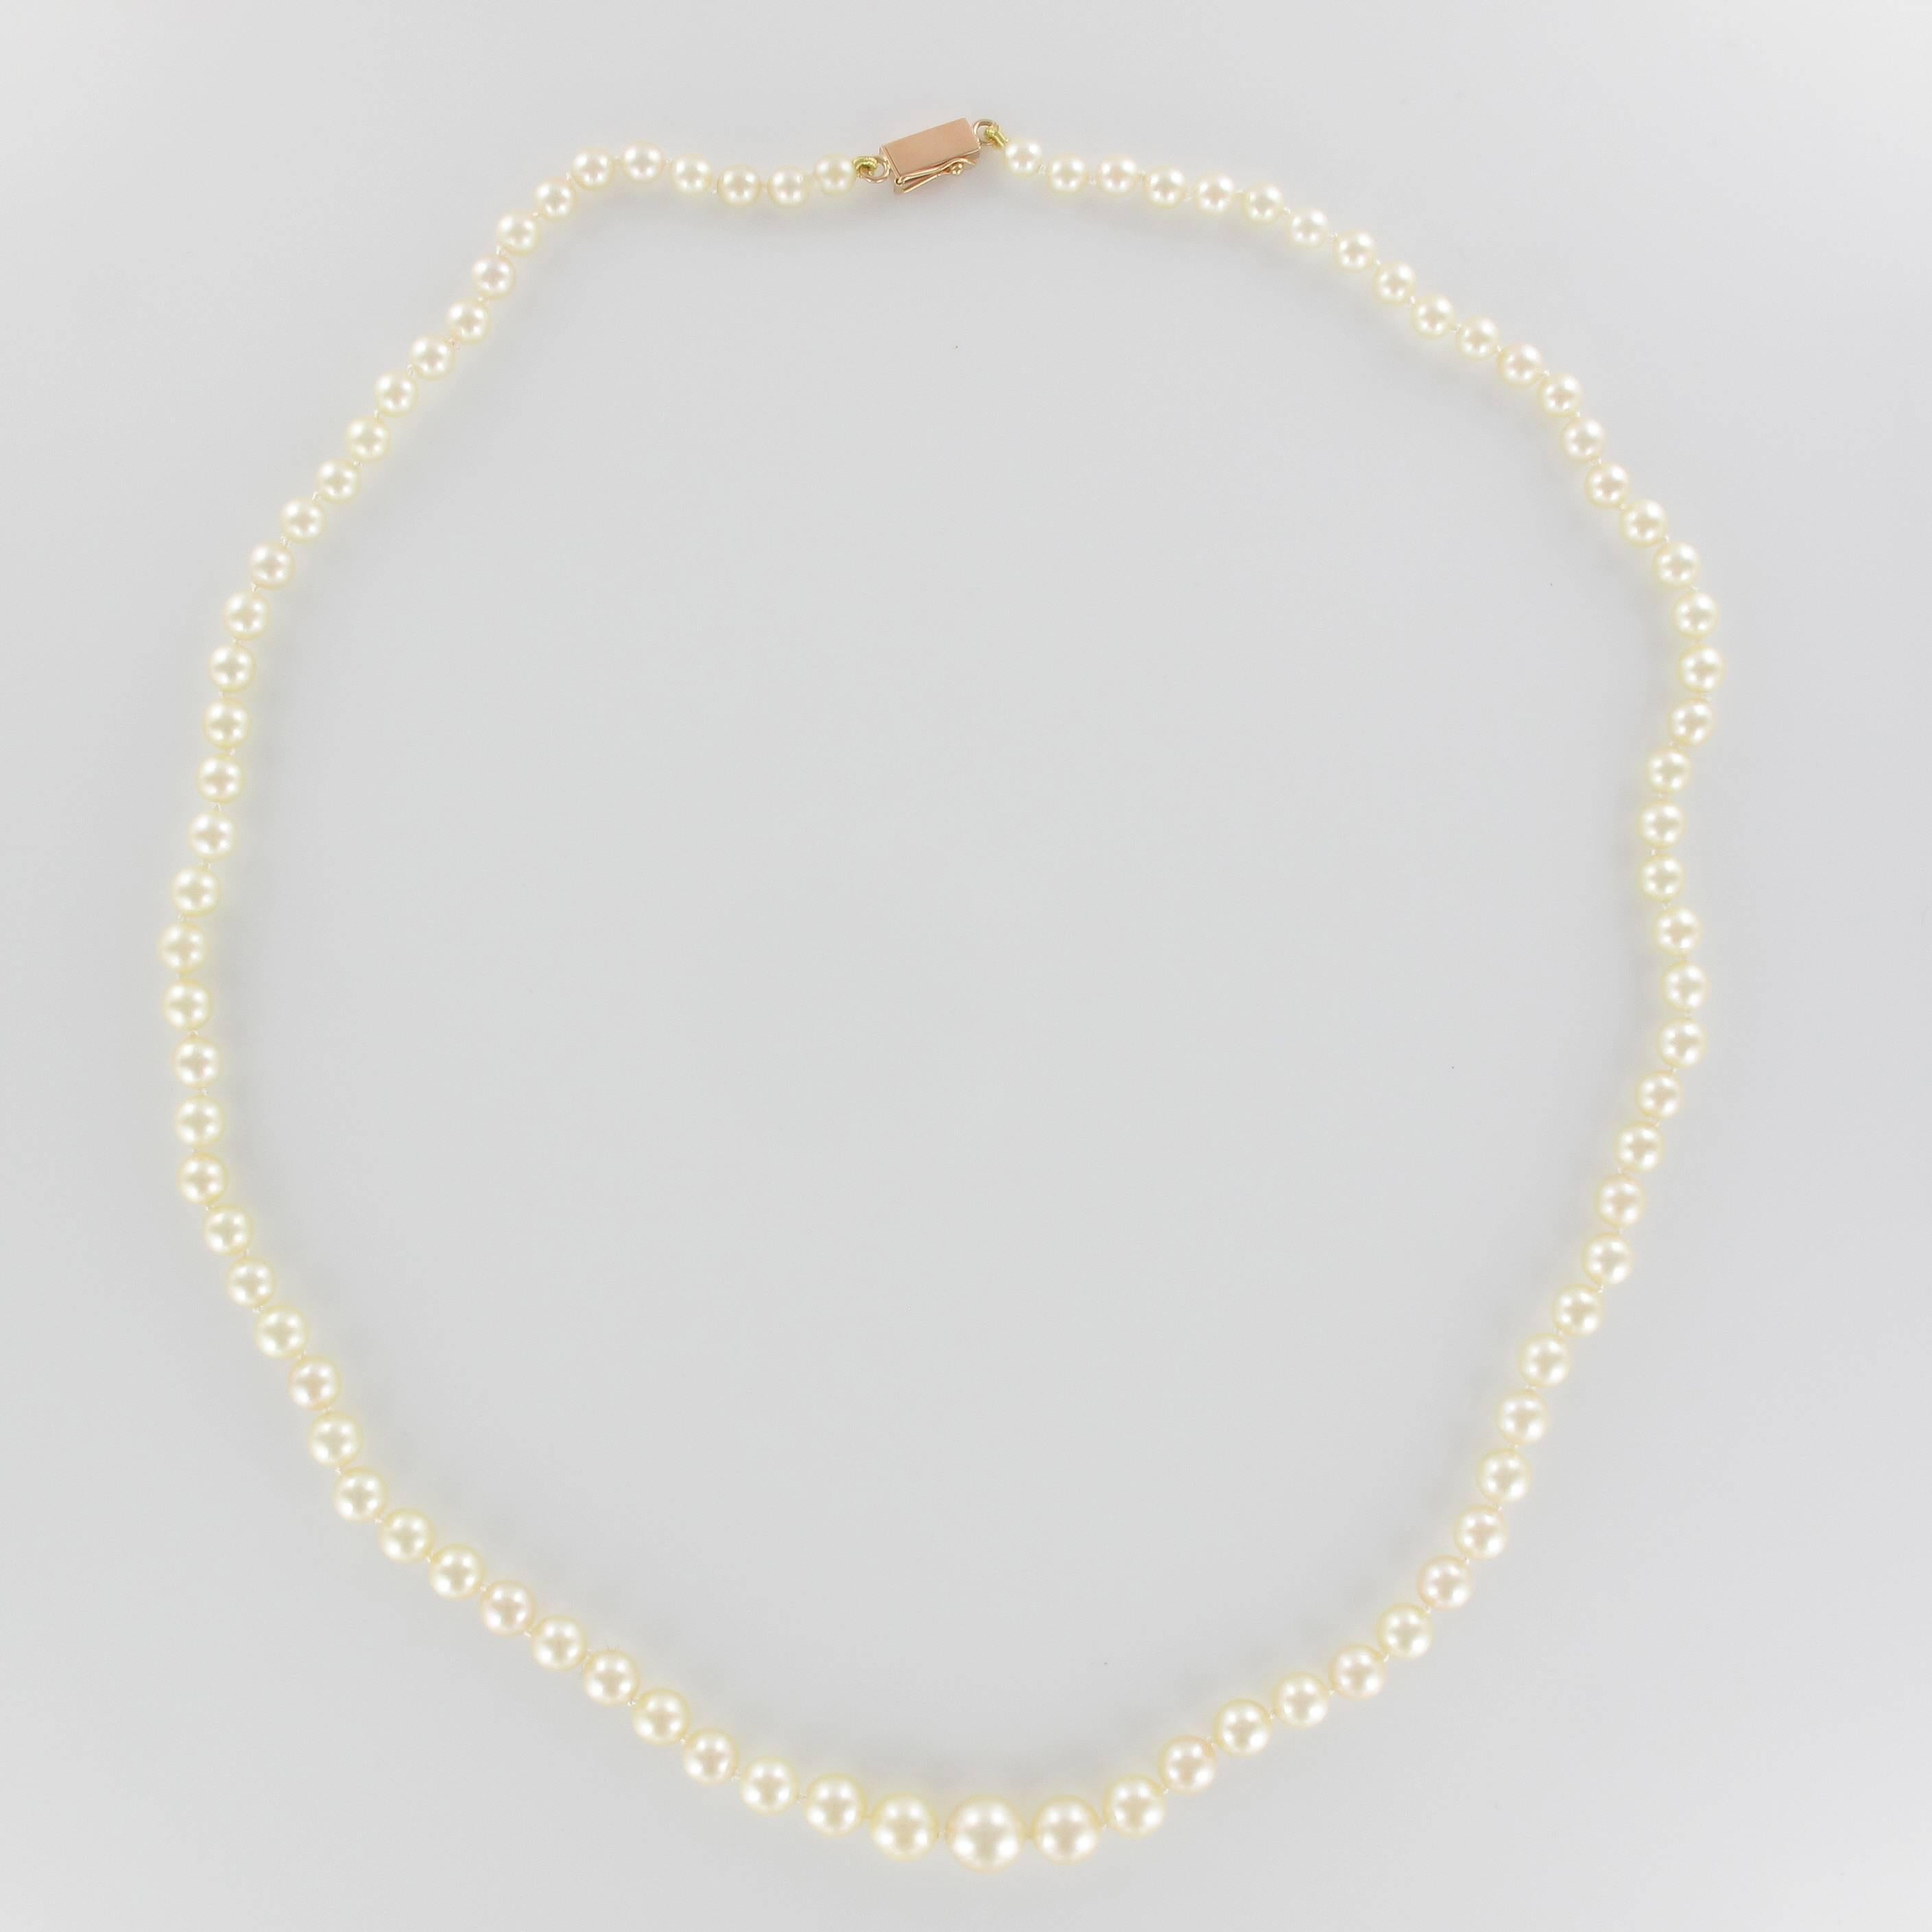 Retro 1950s Japanese Cultured Round Pearl Necklace